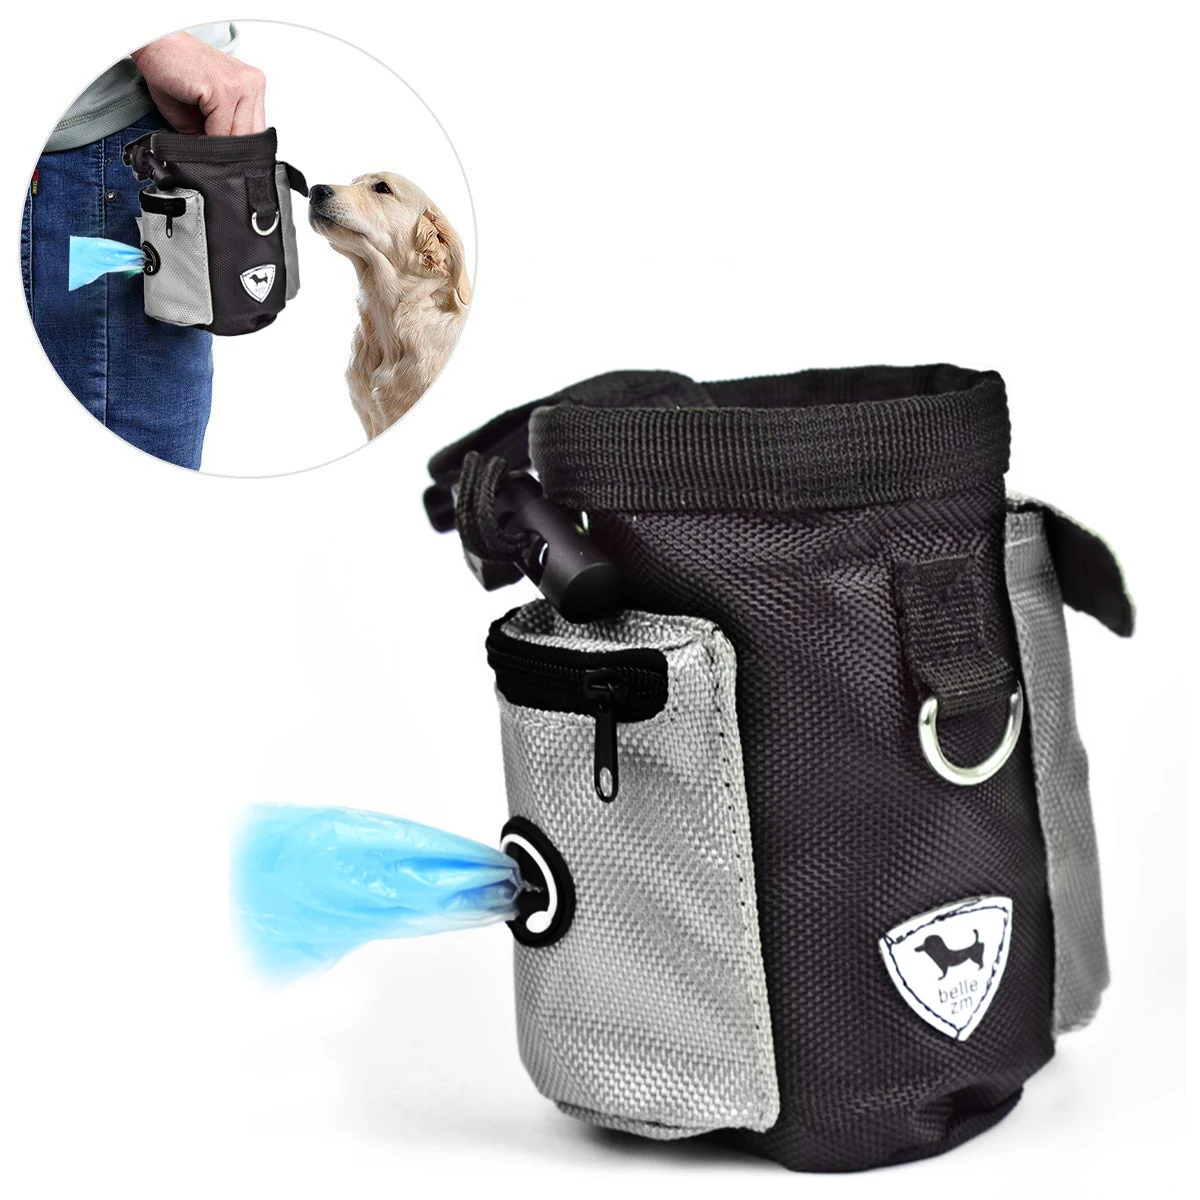 

Dog Treat Pouch Drawstring Carries Pet Toys Food Poop Bag Pouch Pet Hands Free Training Waist Bag Pet Product